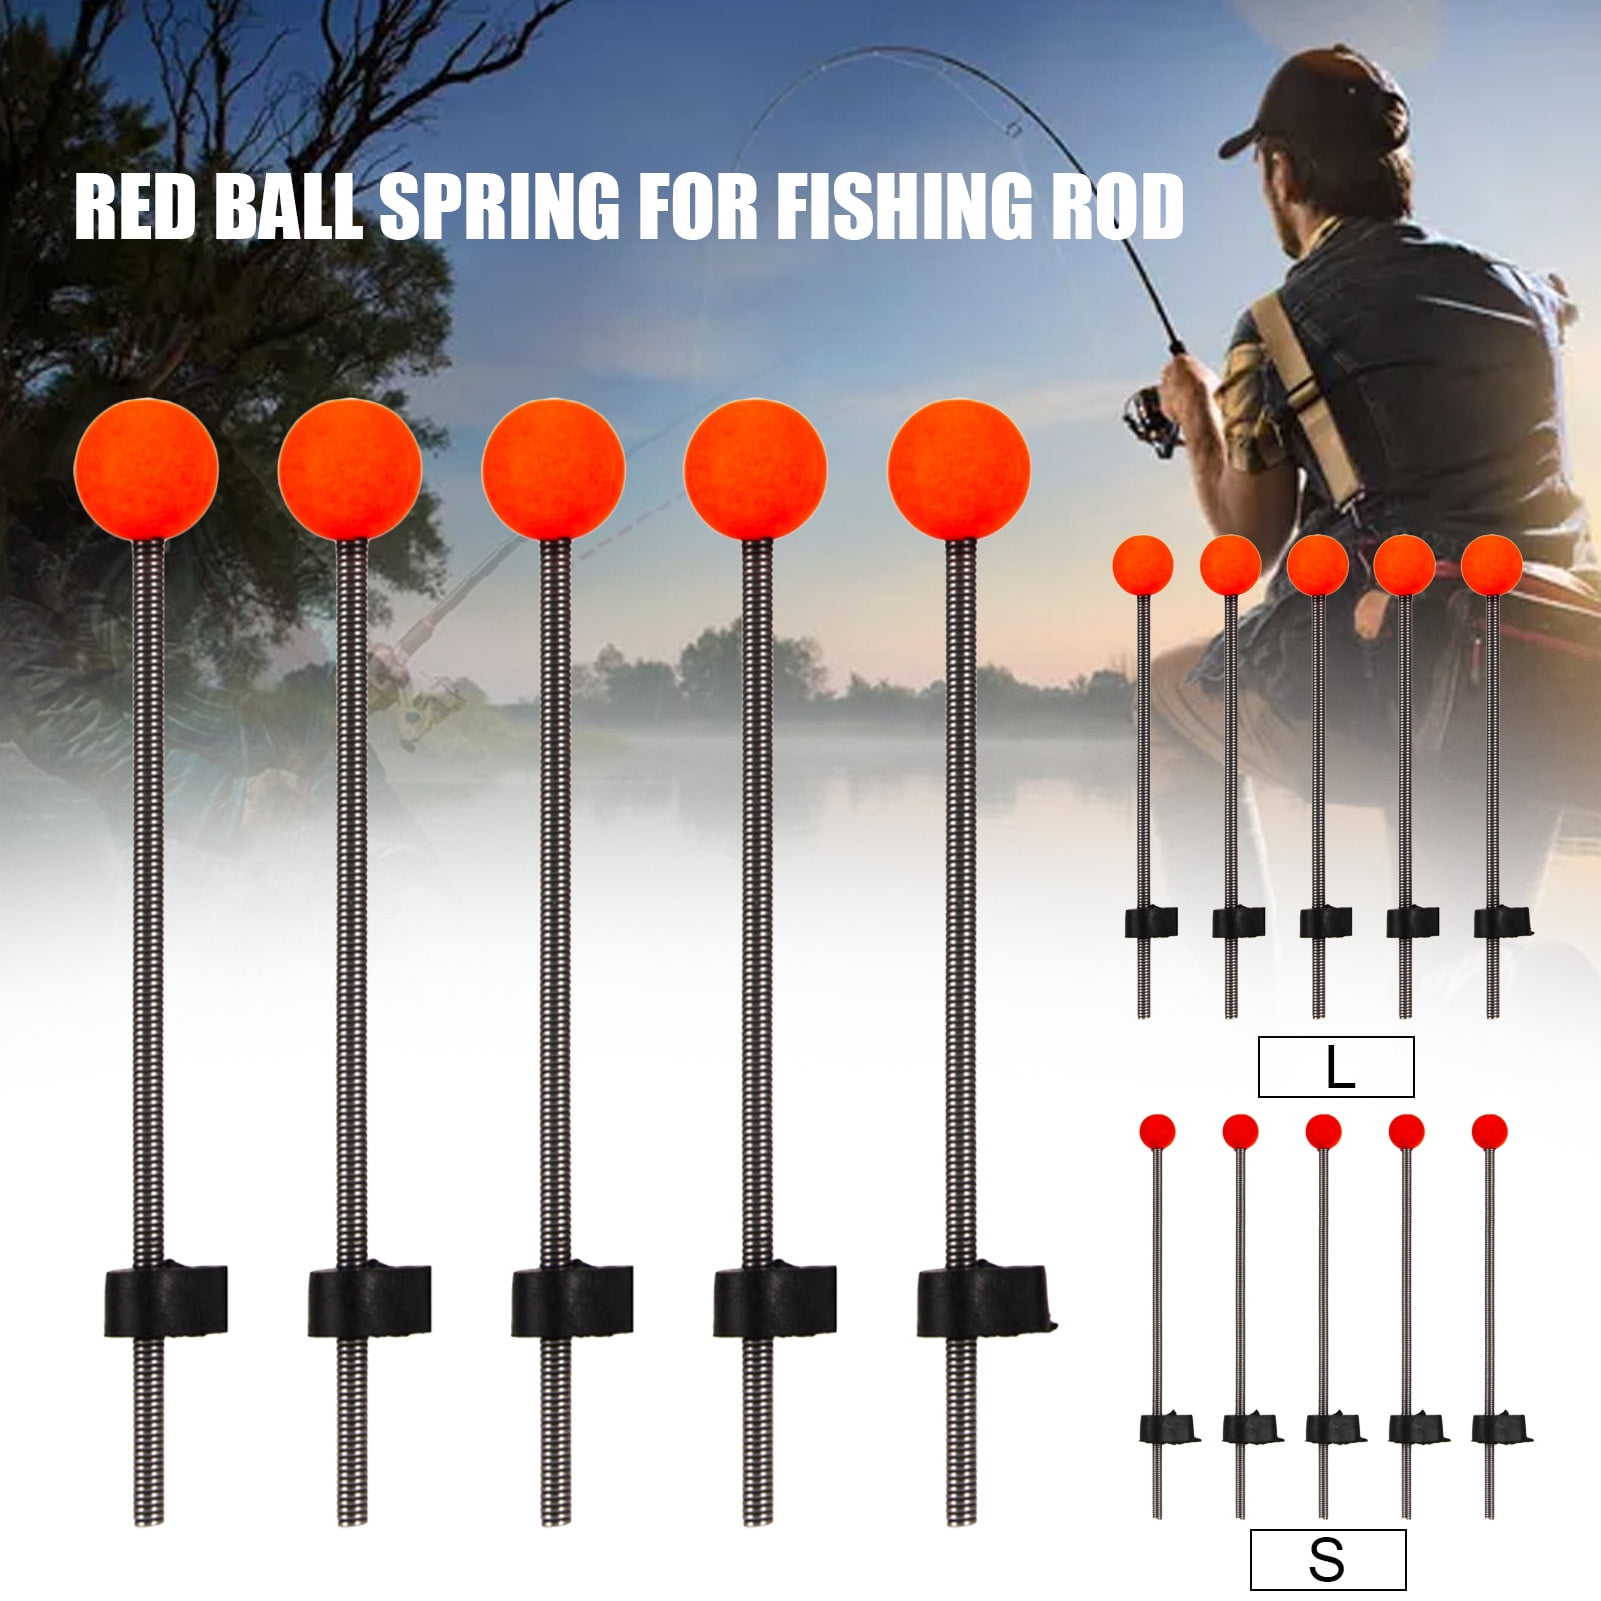 Details about   Fishing Tools Fishing Red Ball Spring Fishing Rod Tools Tackle Accessories 